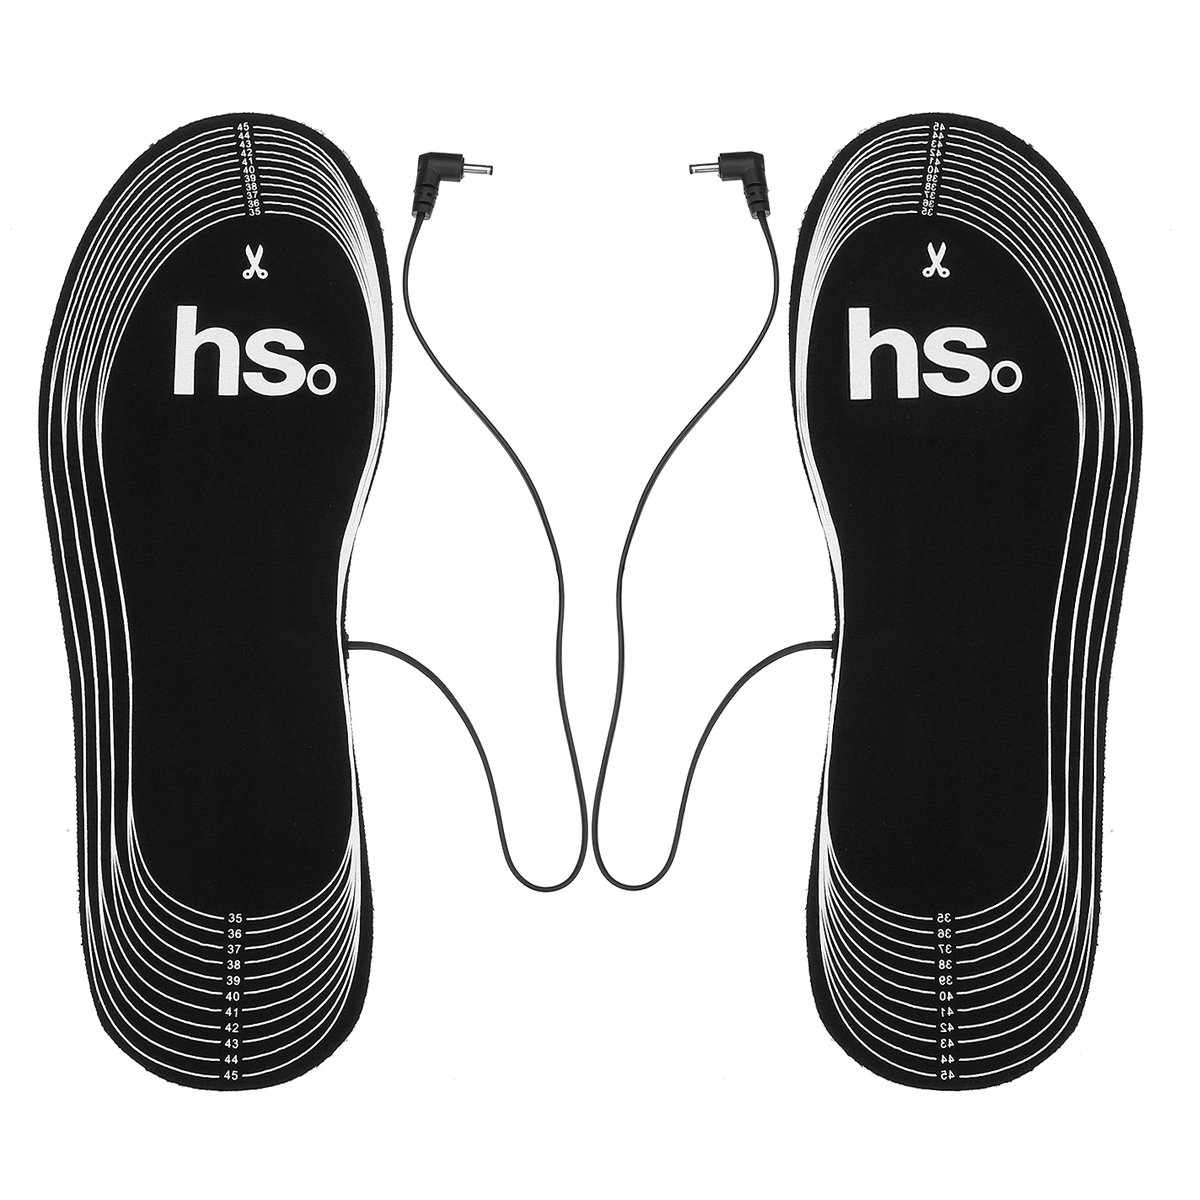 USB Rechargeable Heated Insoles Foot Warmer Heater Charging Heat Boots Shoes Pad 